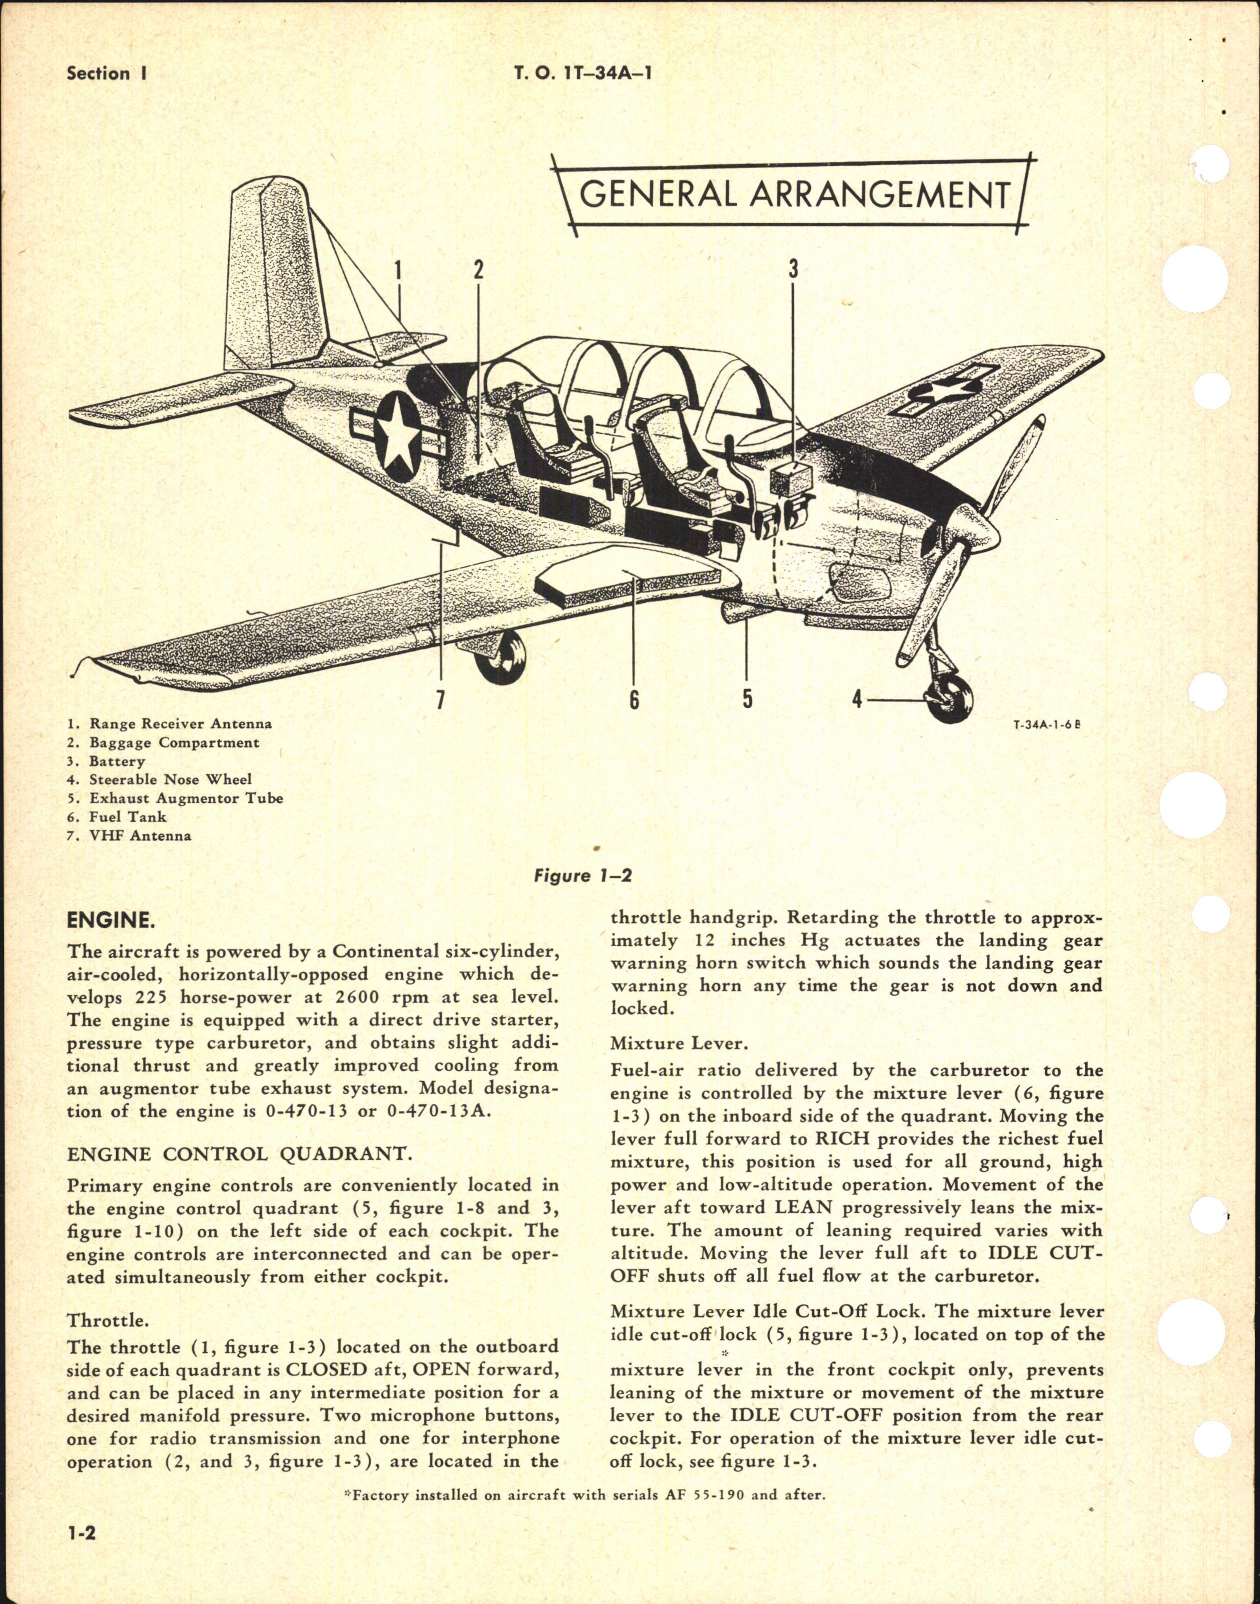 Sample page 8 from AirCorps Library document: Flight Handbook for T-34A